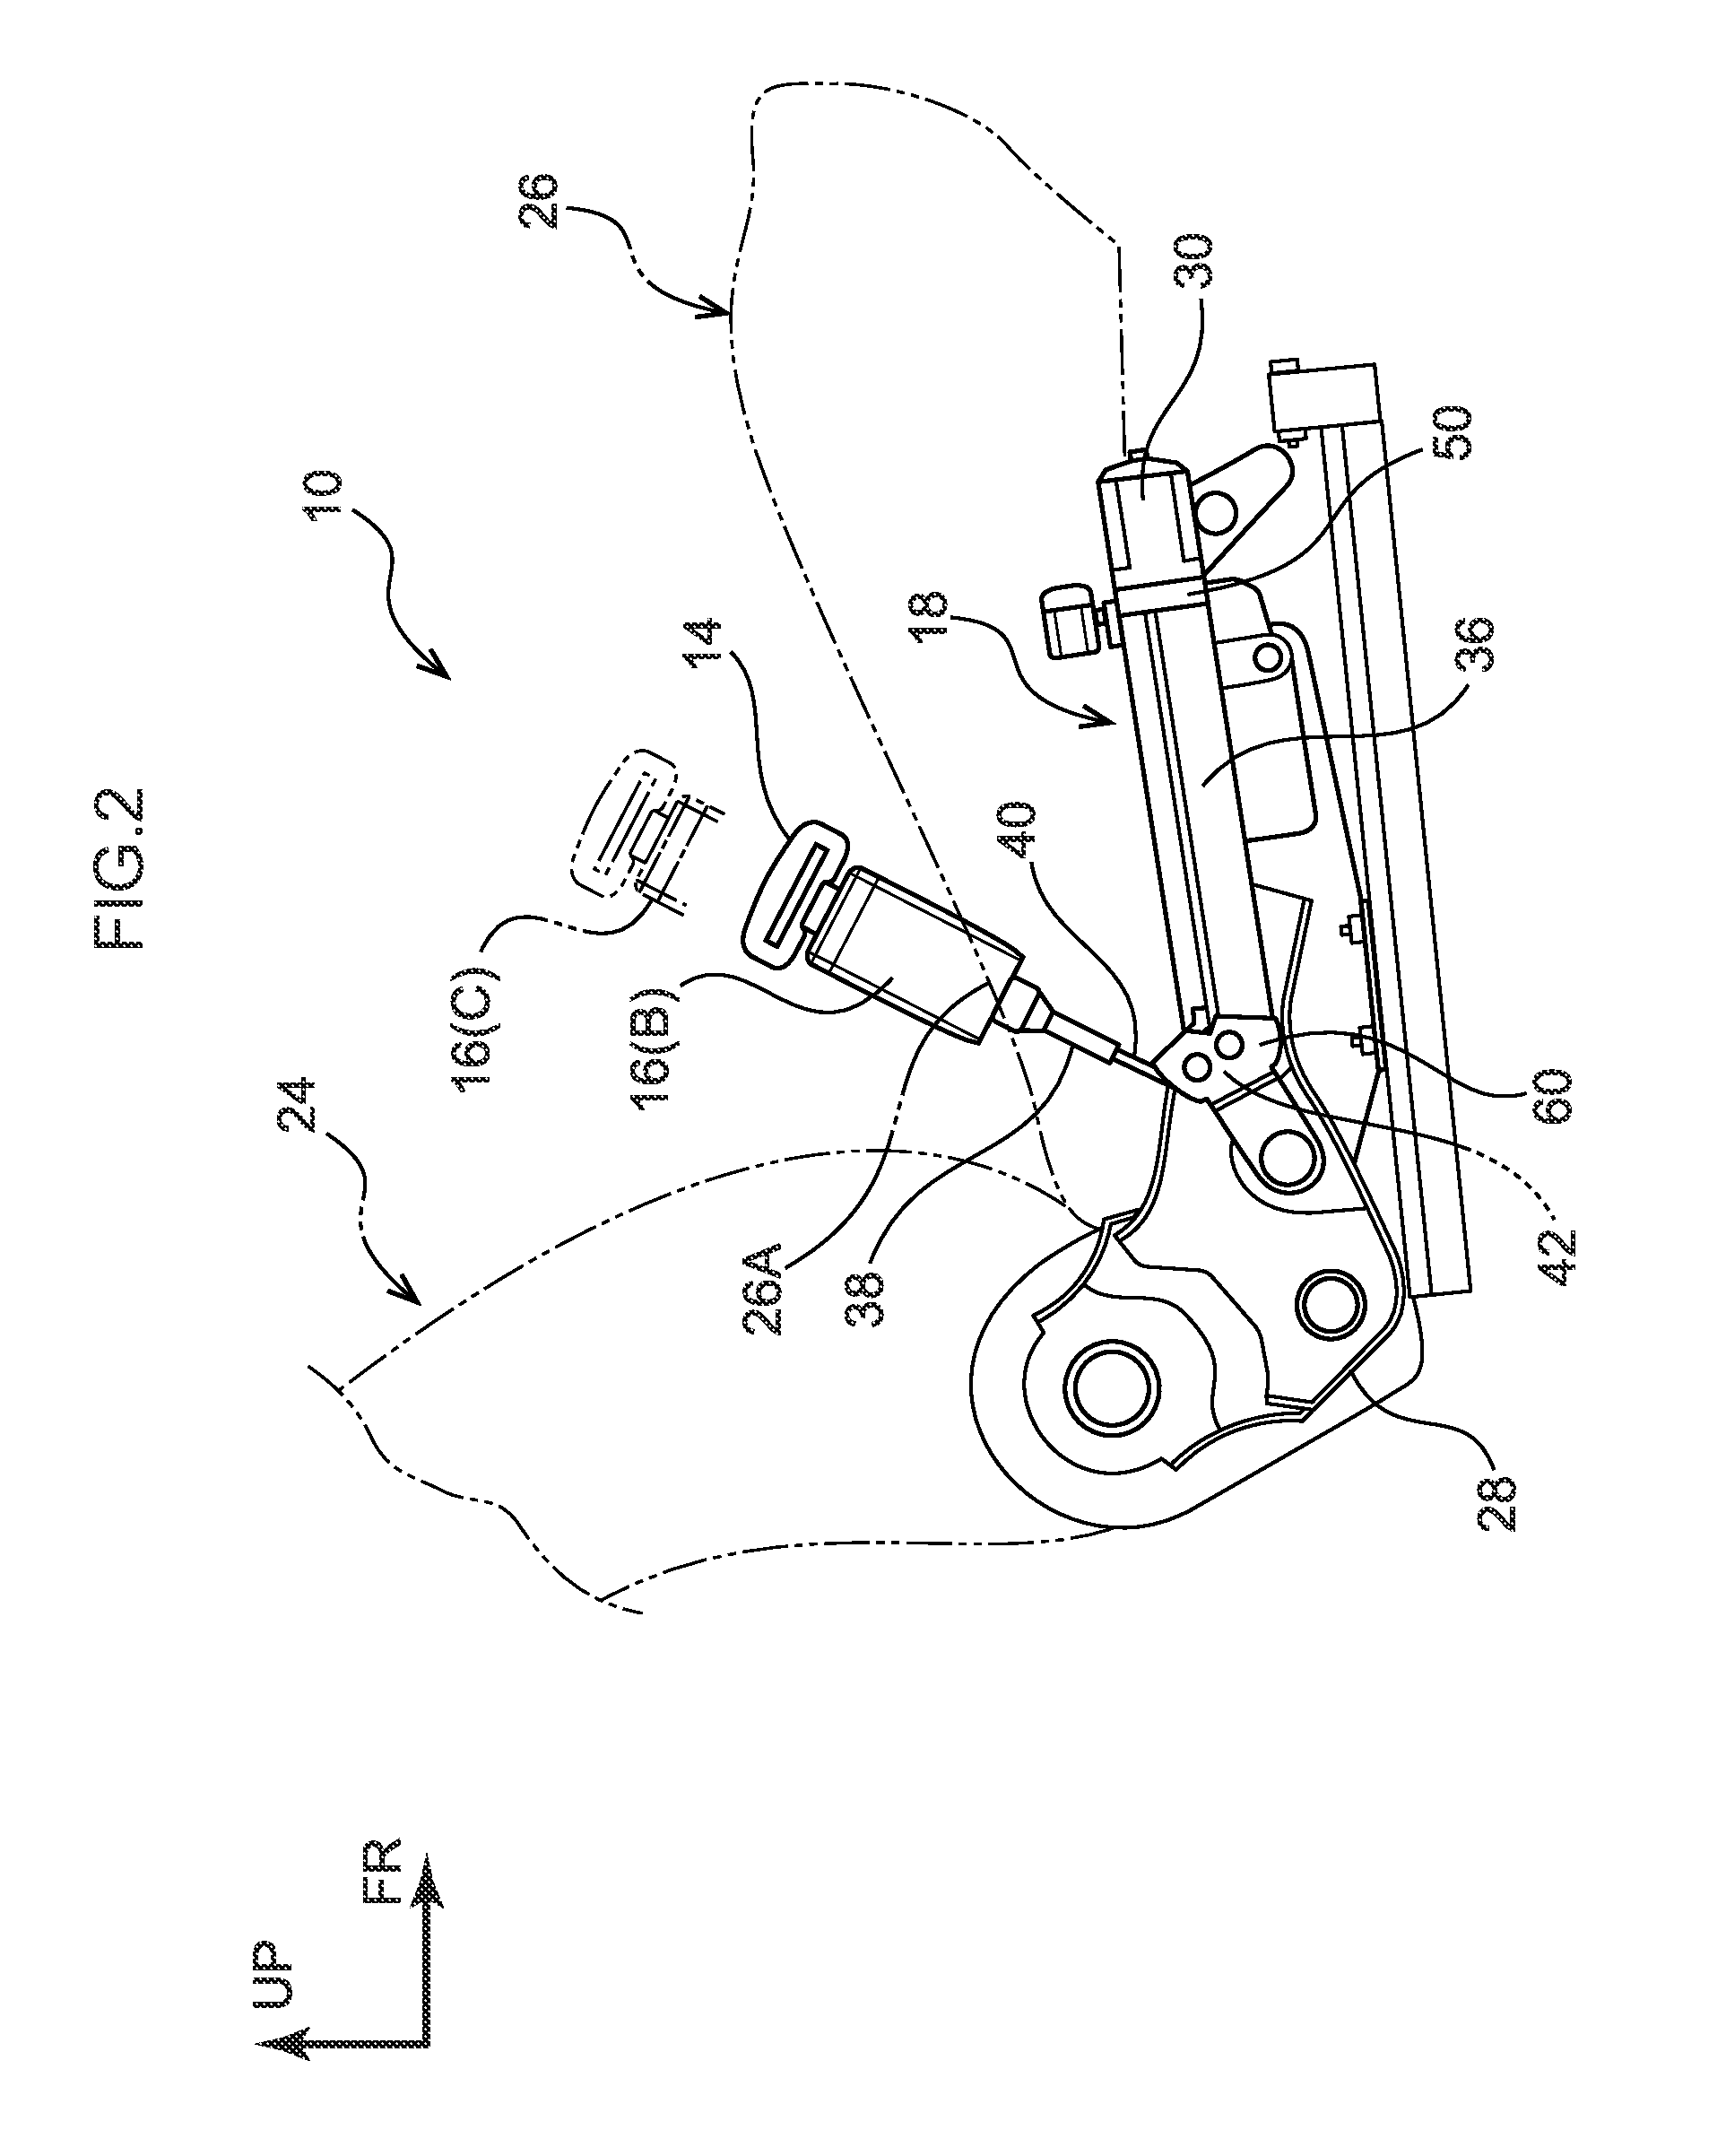 Lift-up buckle device